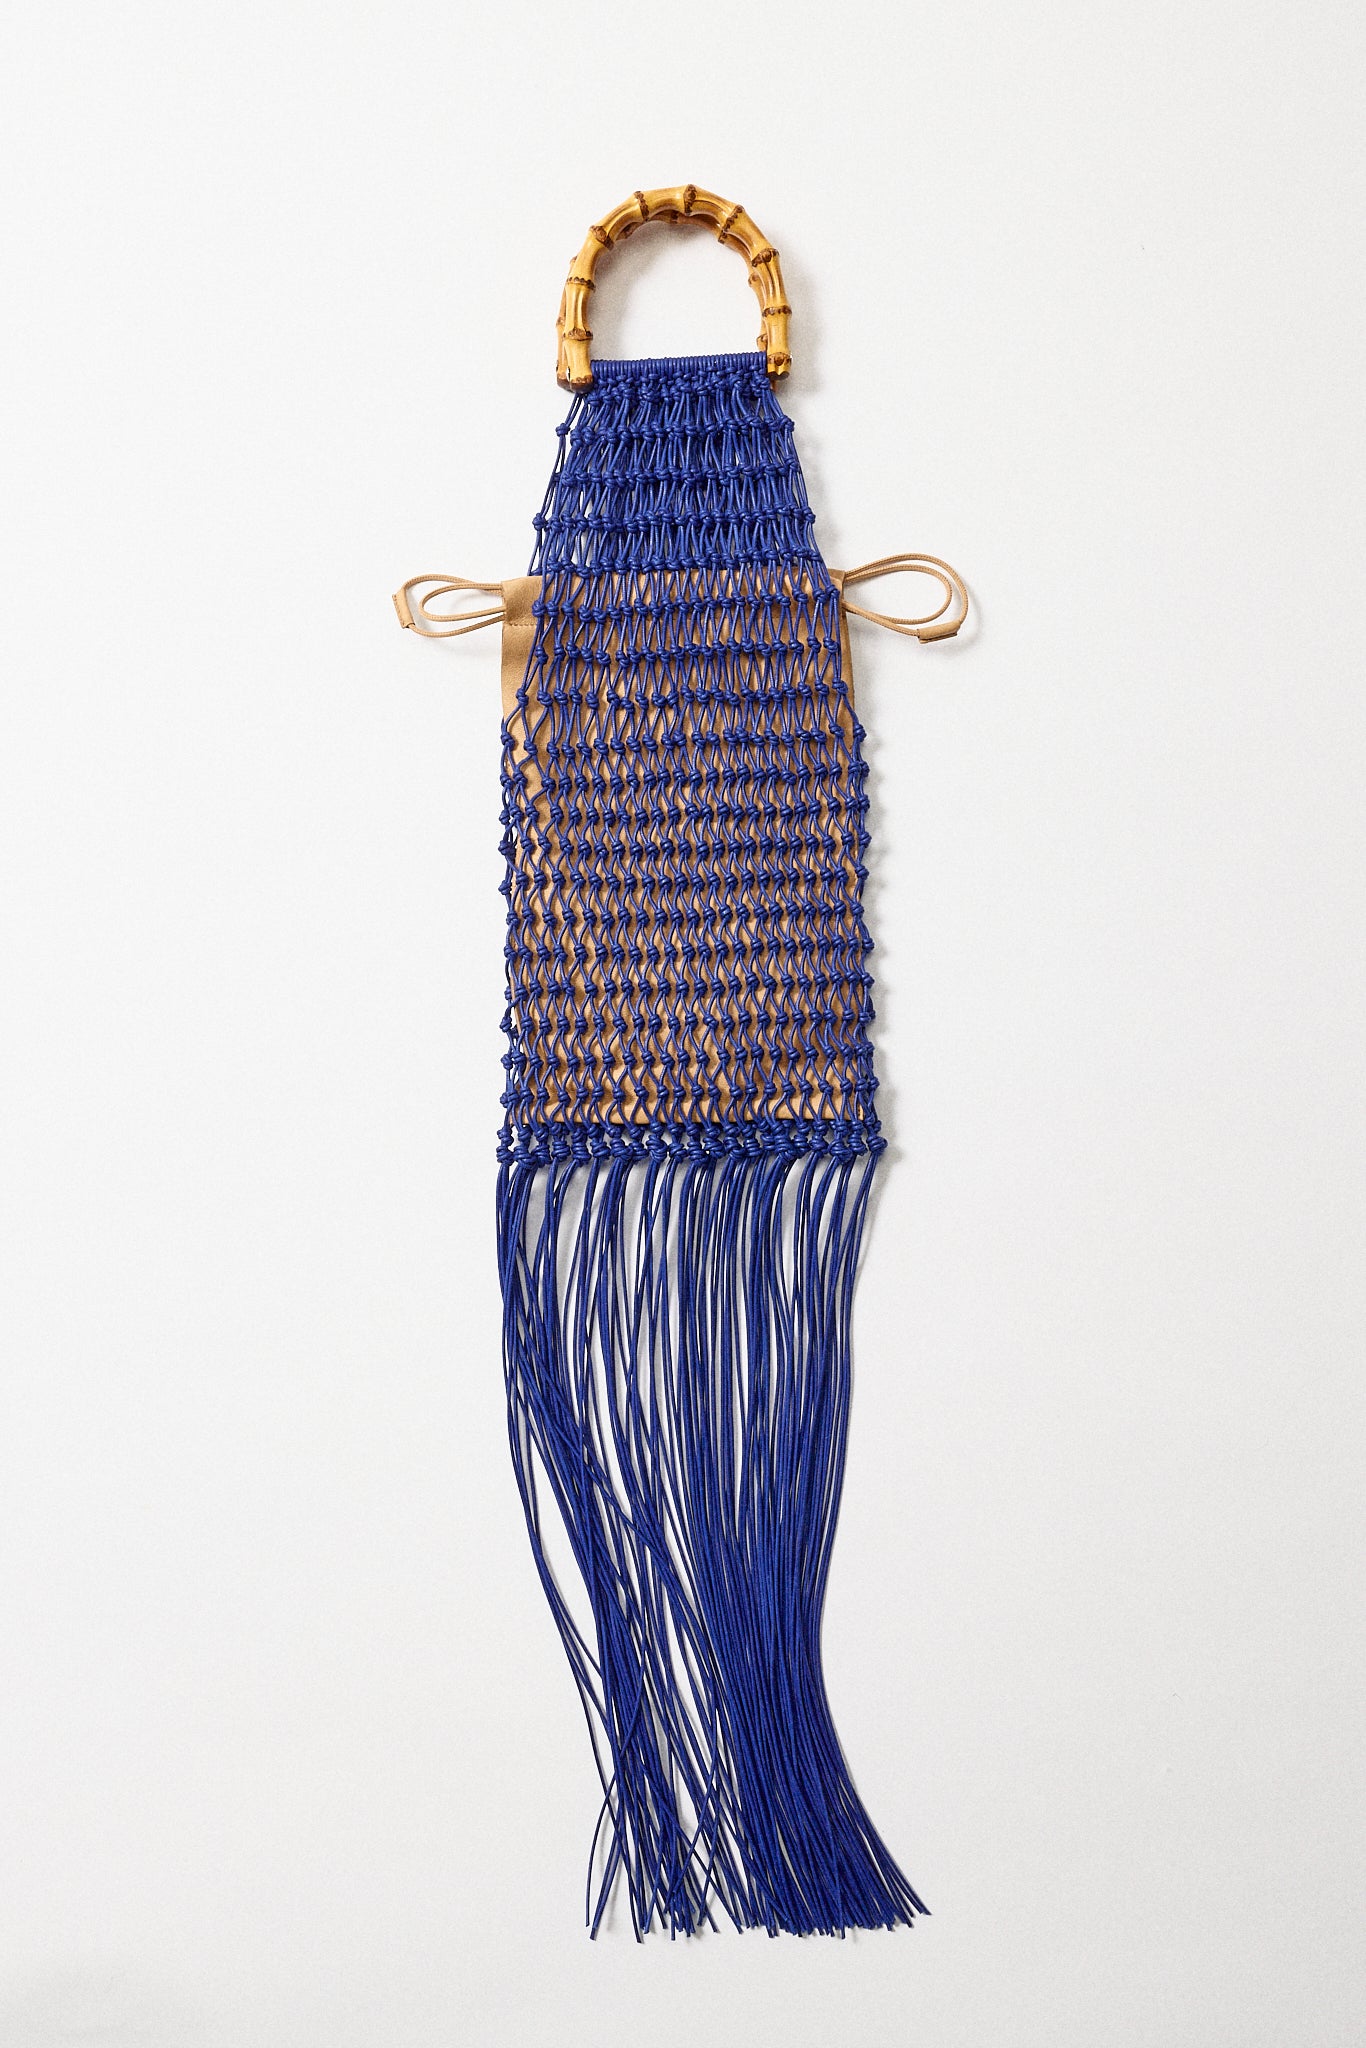 Cobalt Knotted Bamboo Bag